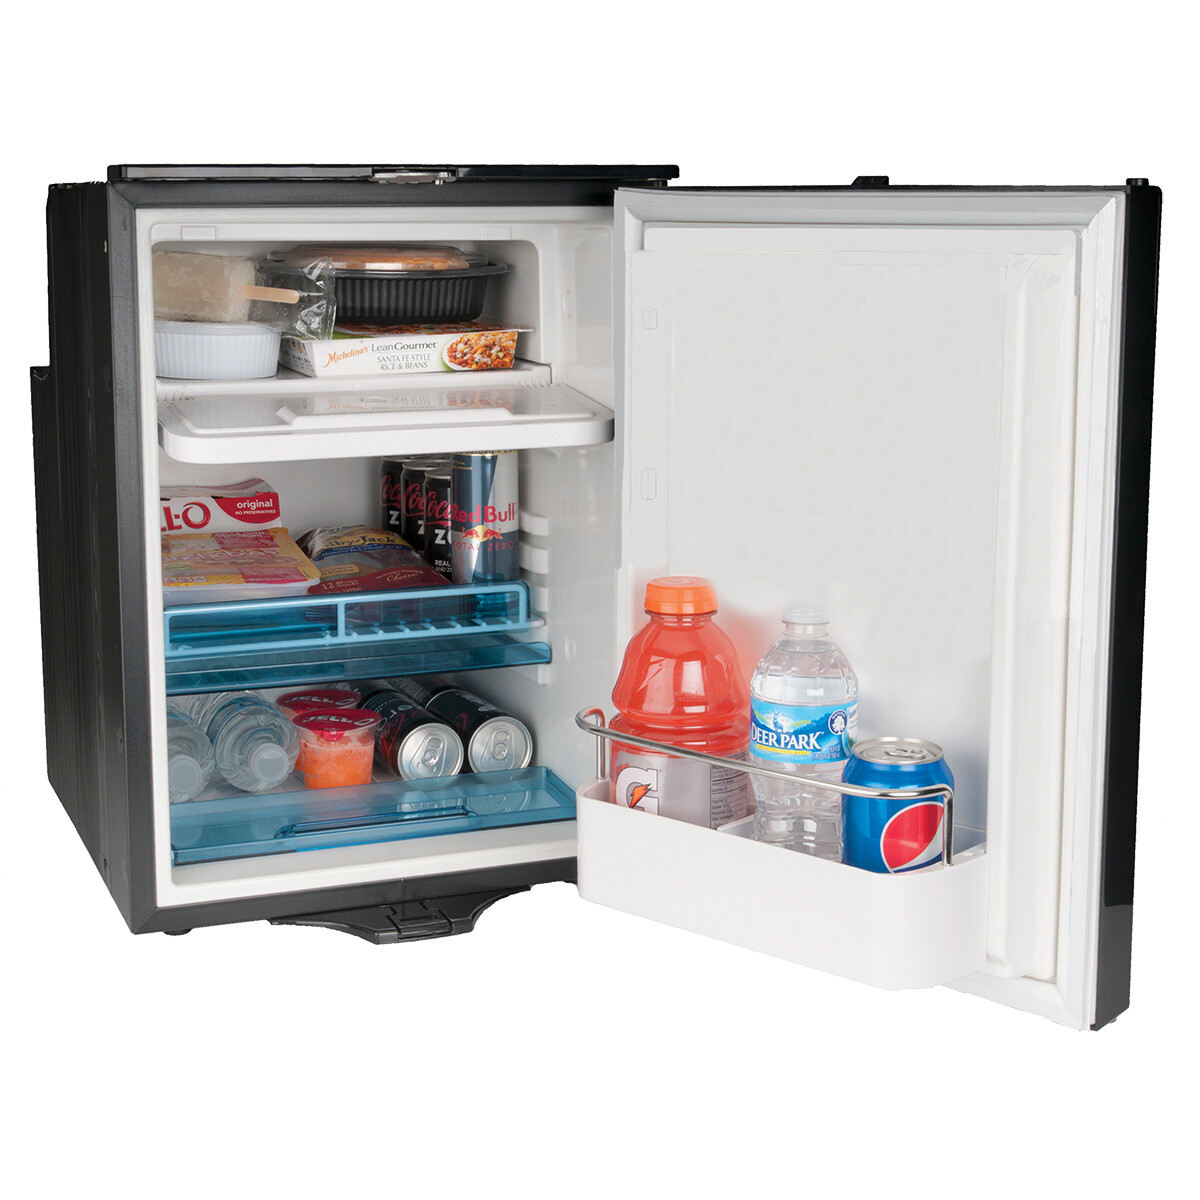 Dometic Refrigerator with Installation Kit